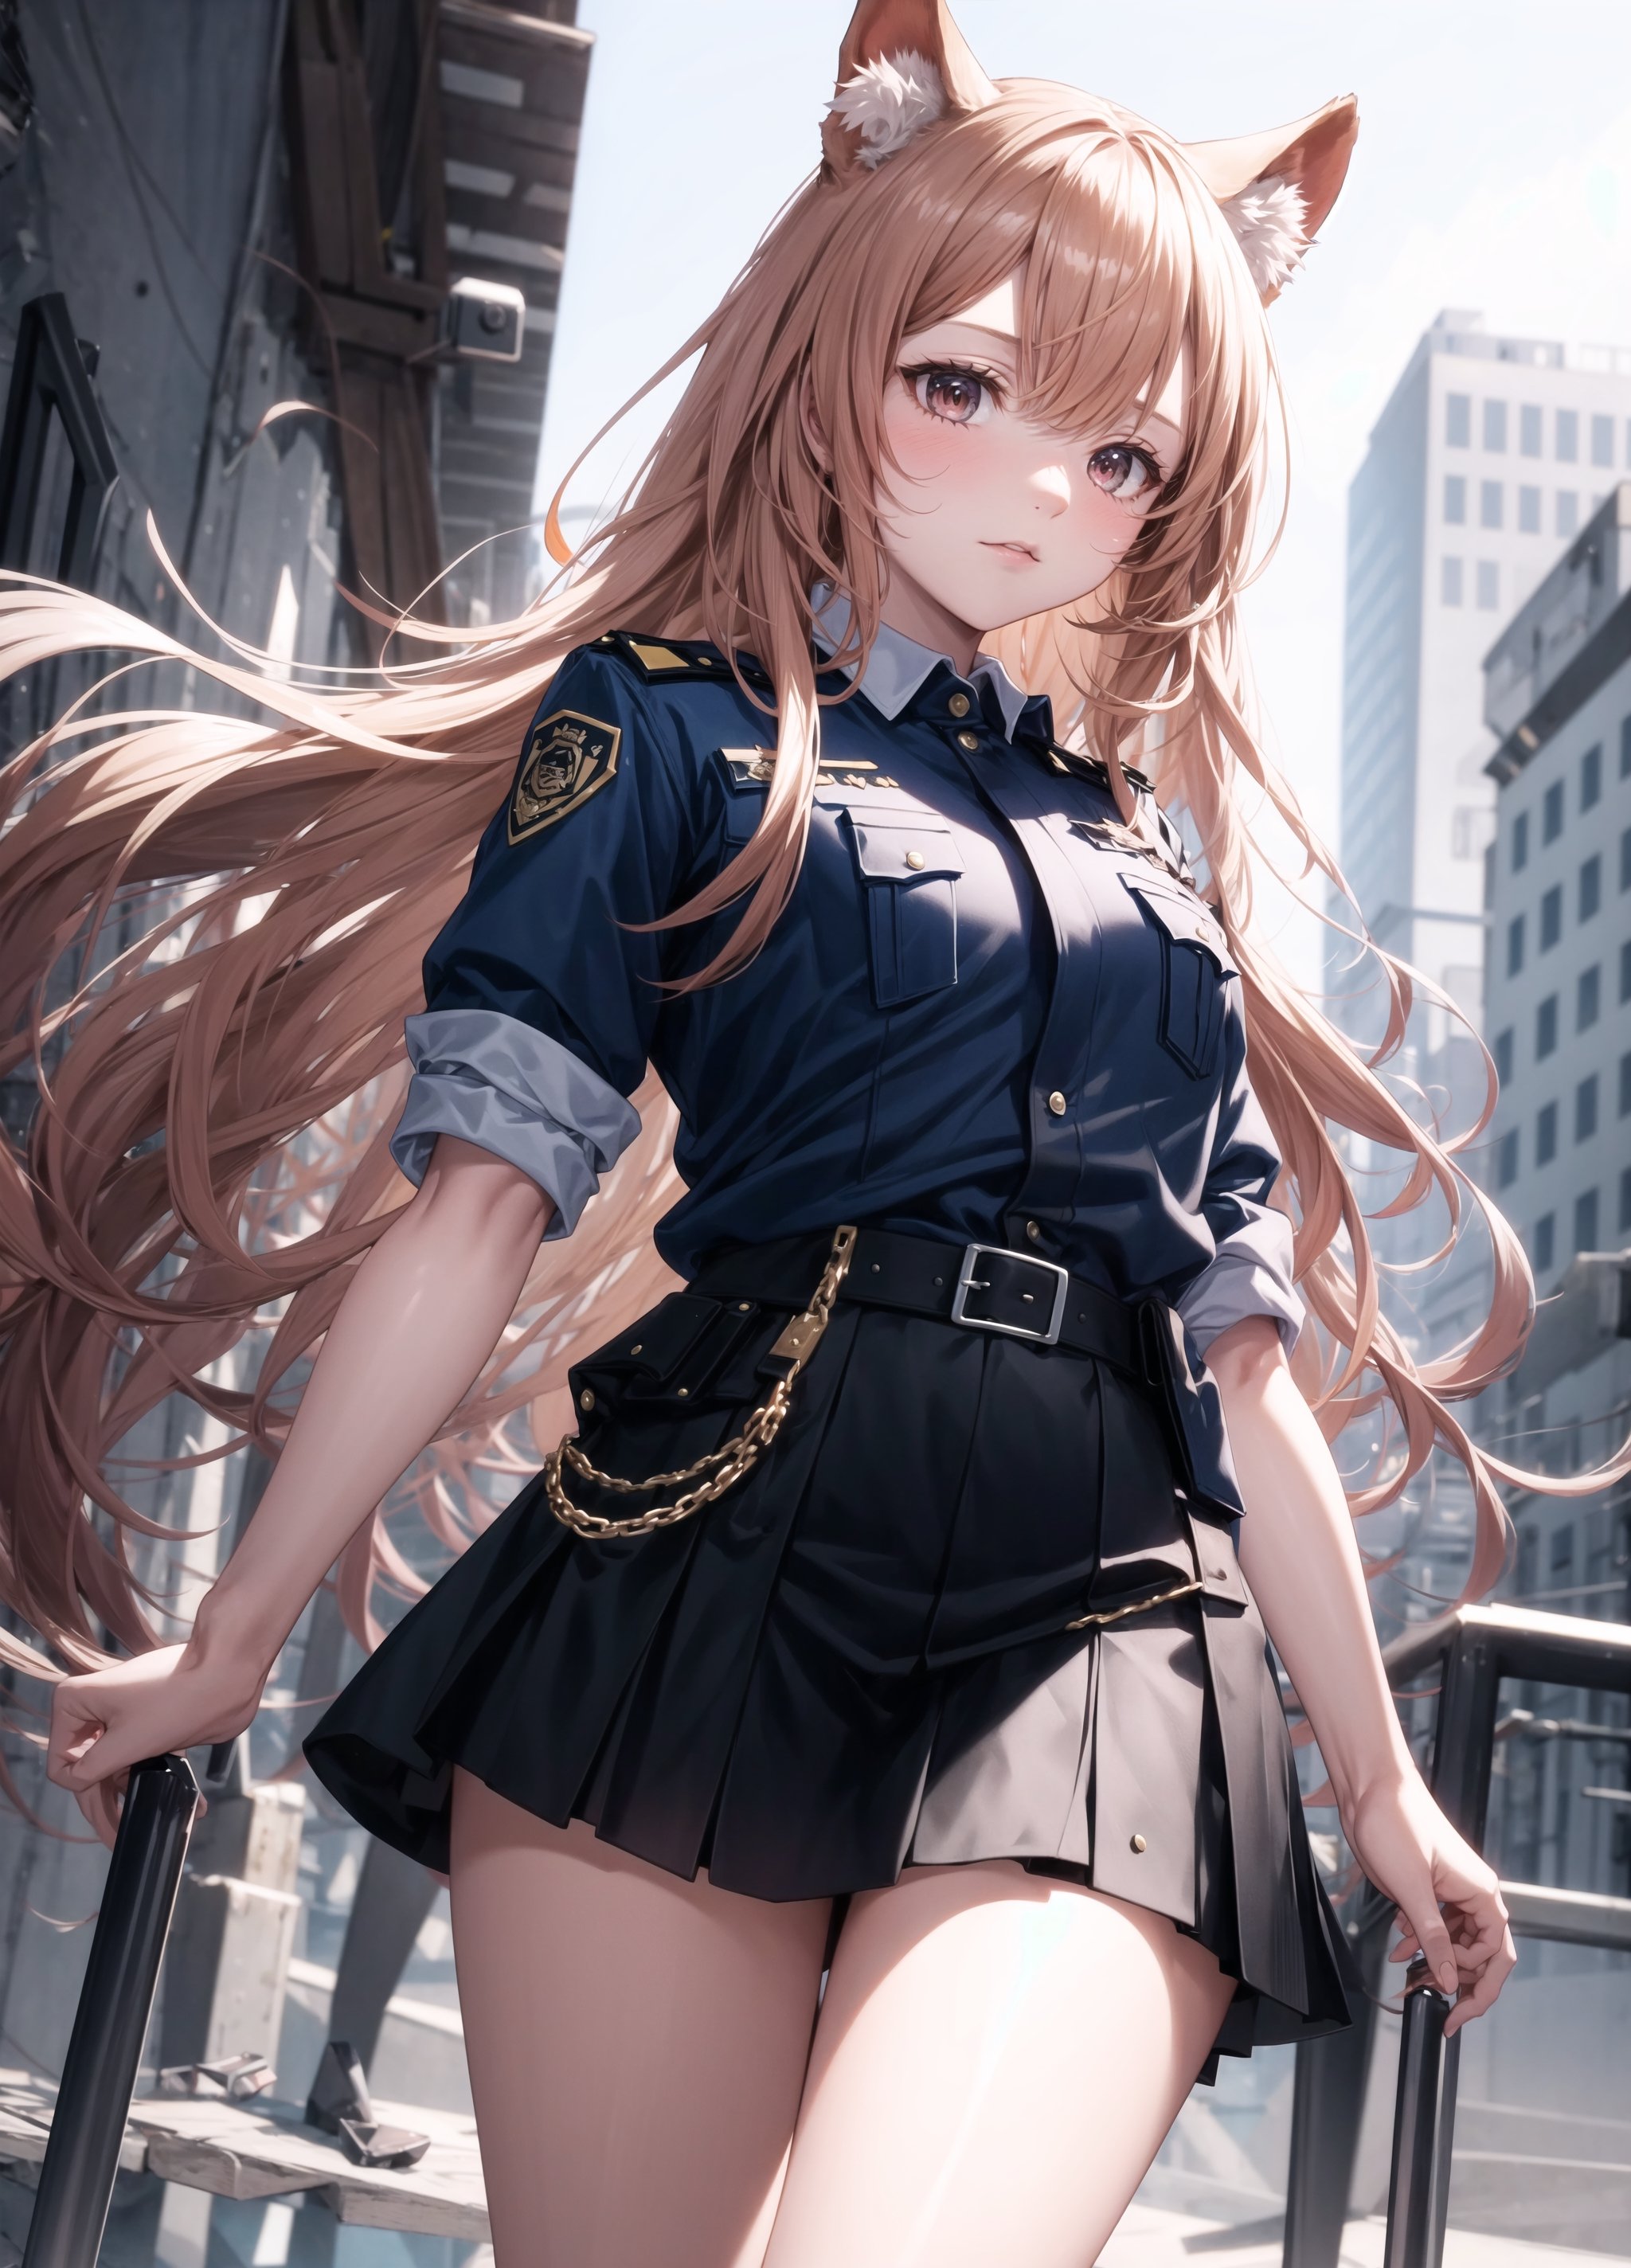 A girl, 30 years old, wearing a police uniform and narrow skirt, looking from the lower body to the upper body,raphtalia